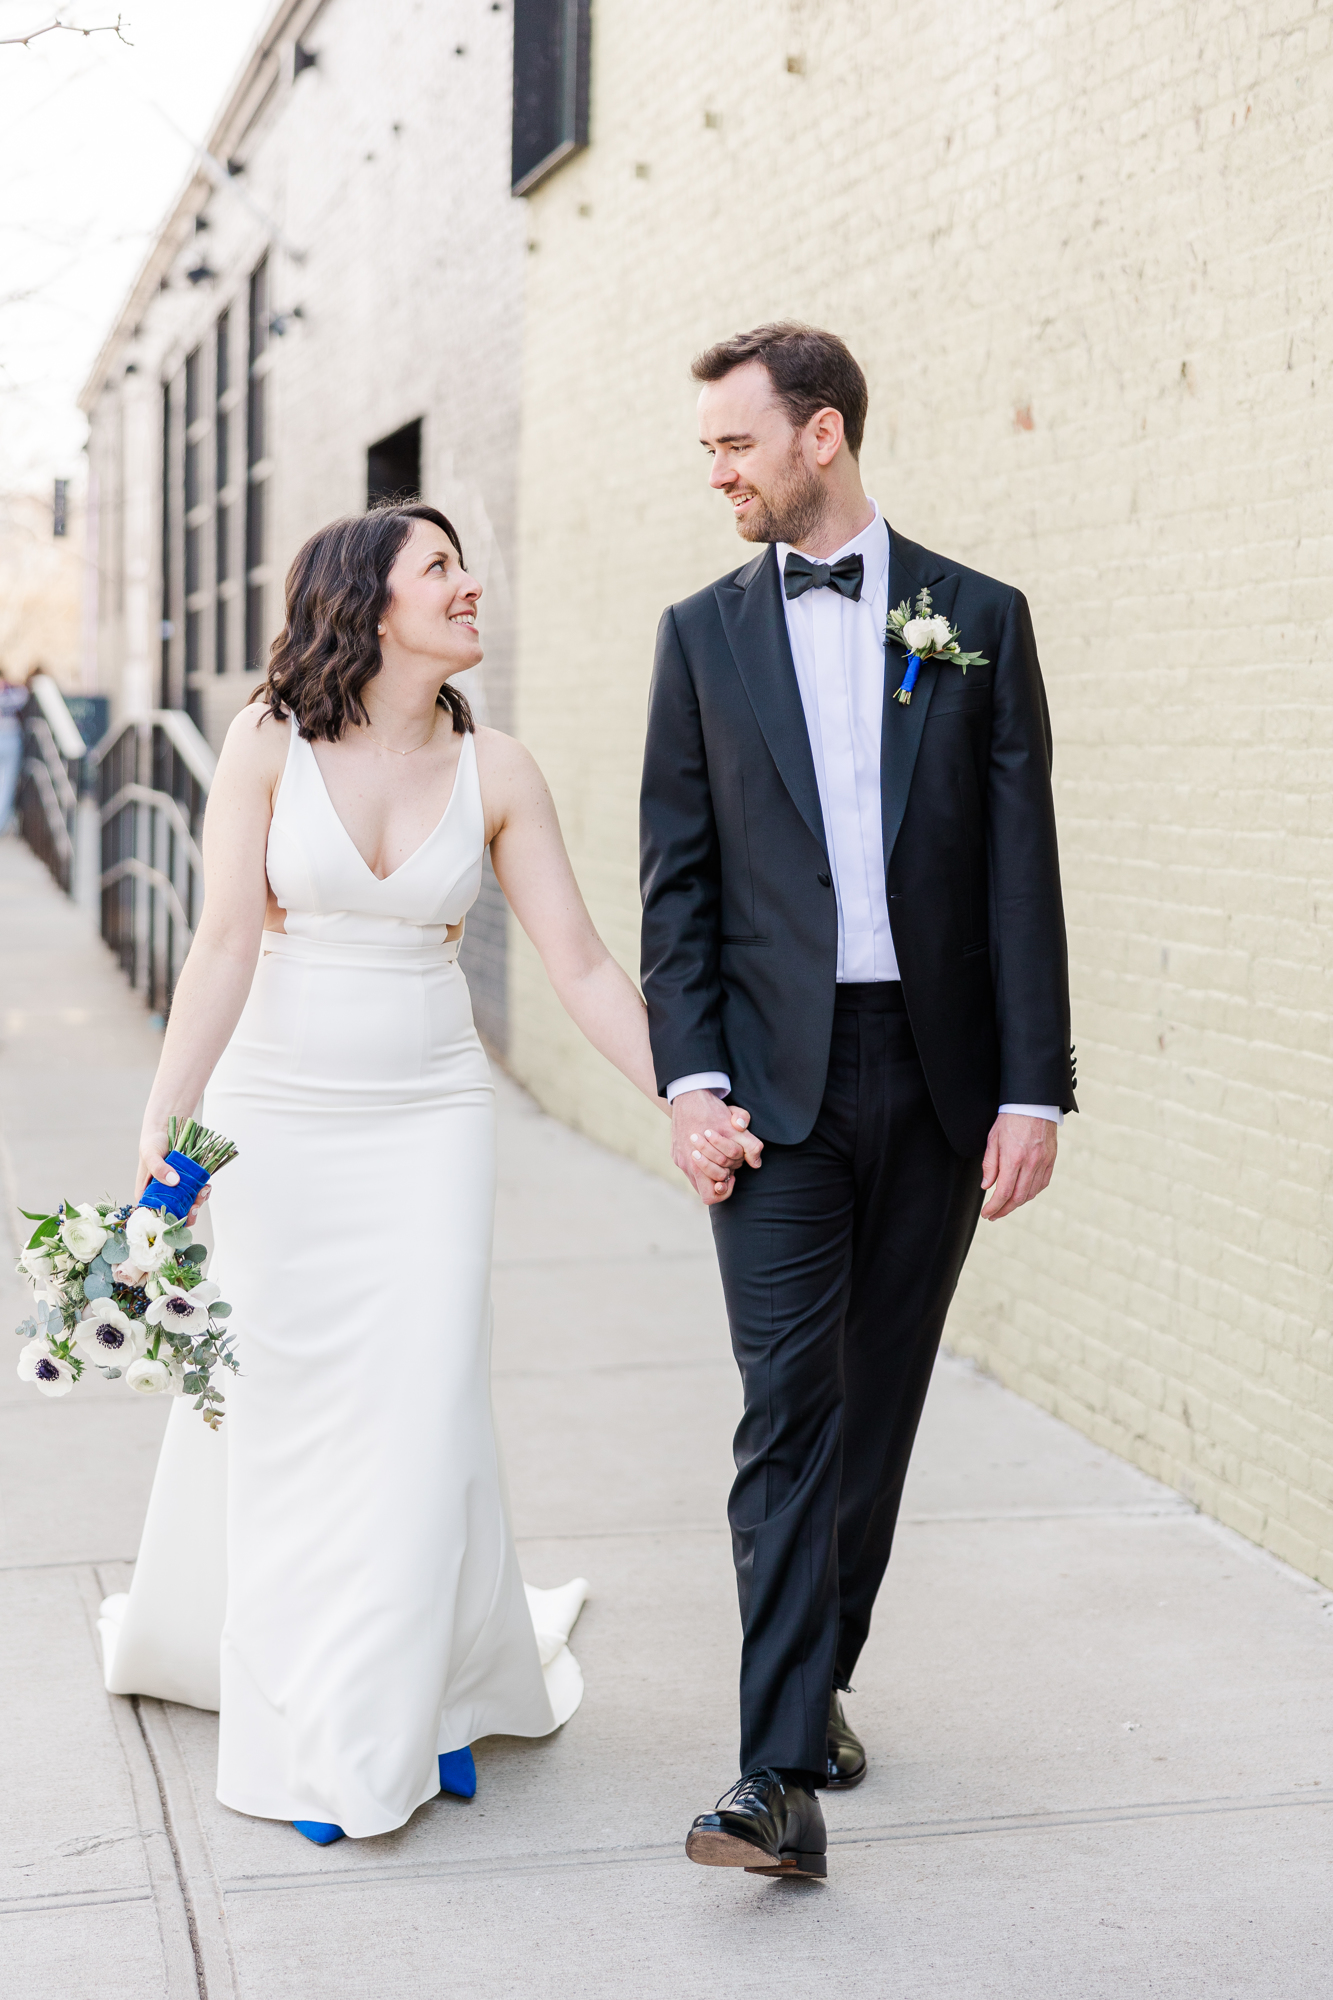 Stunning Spring Wedding Photos at The Green Building in Brooklyn NY